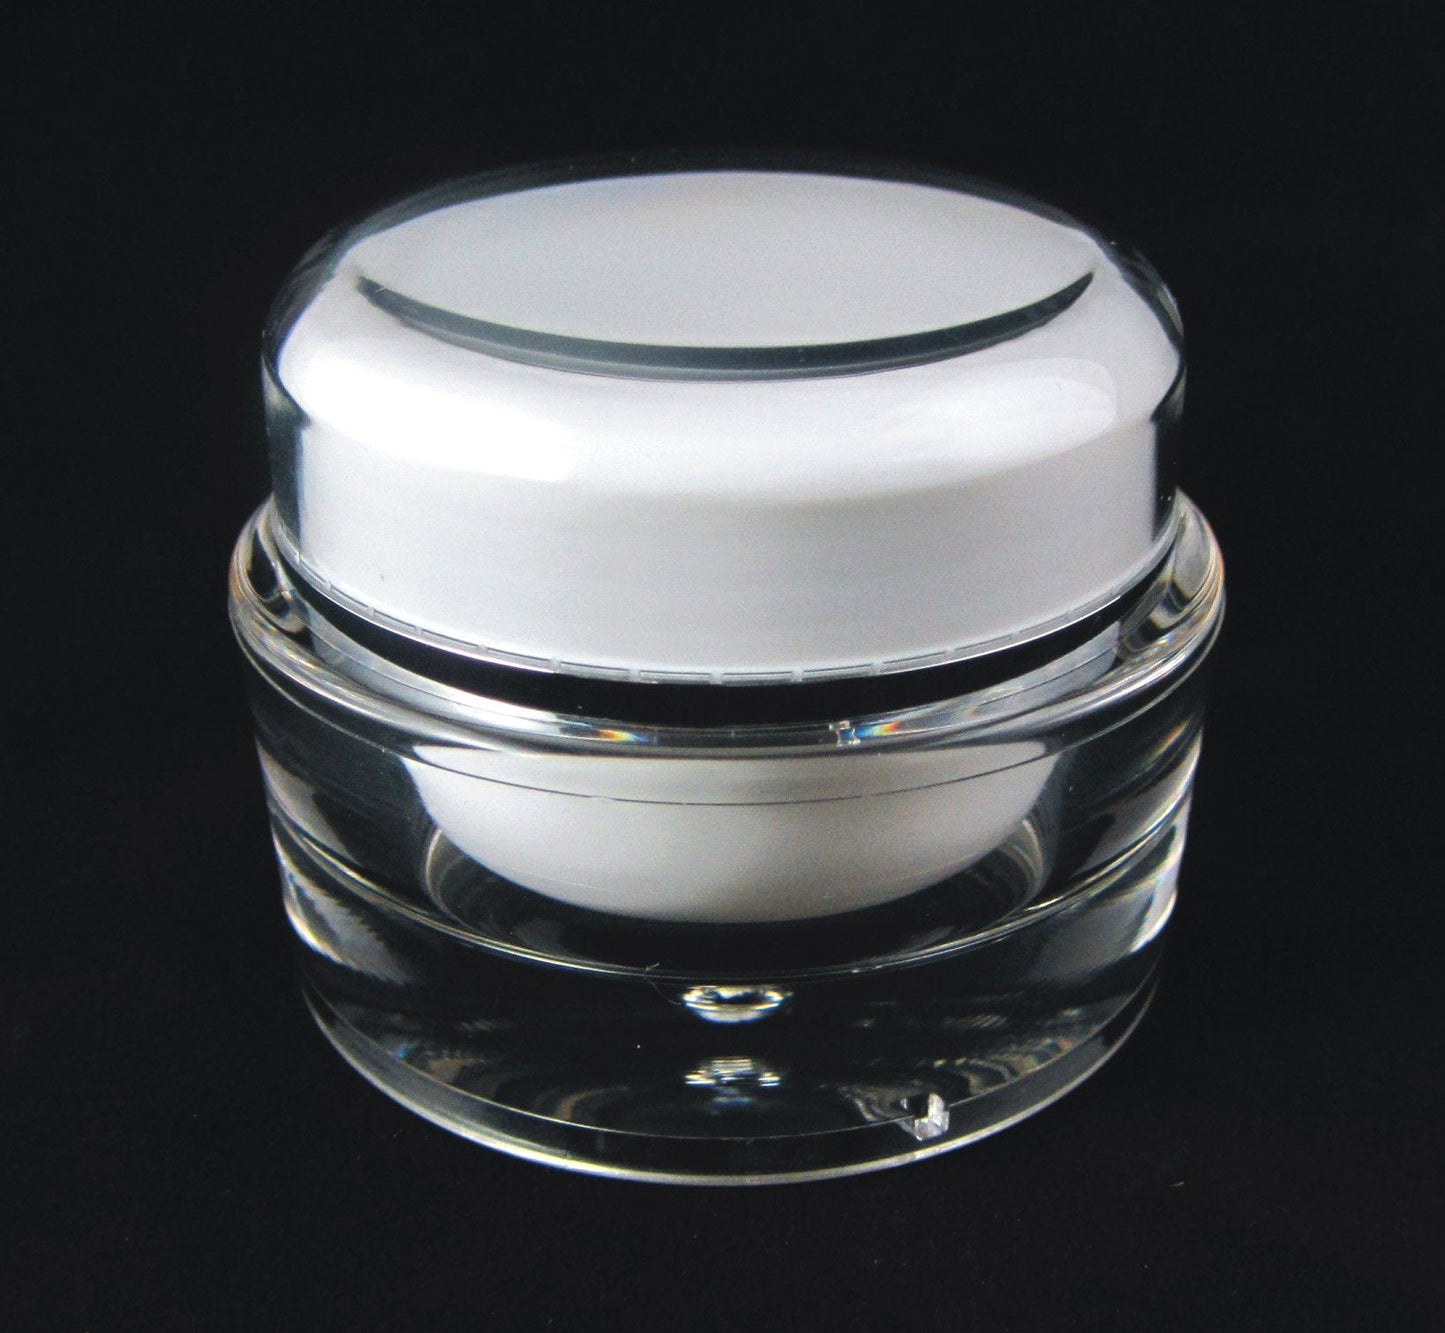 25 Acrylic Cosmetic Cream Jar Elegant Beauty Containers w/ Sealing Disc 30 Ml 1 oz. (3130-25) Discount Cosmetic Jars